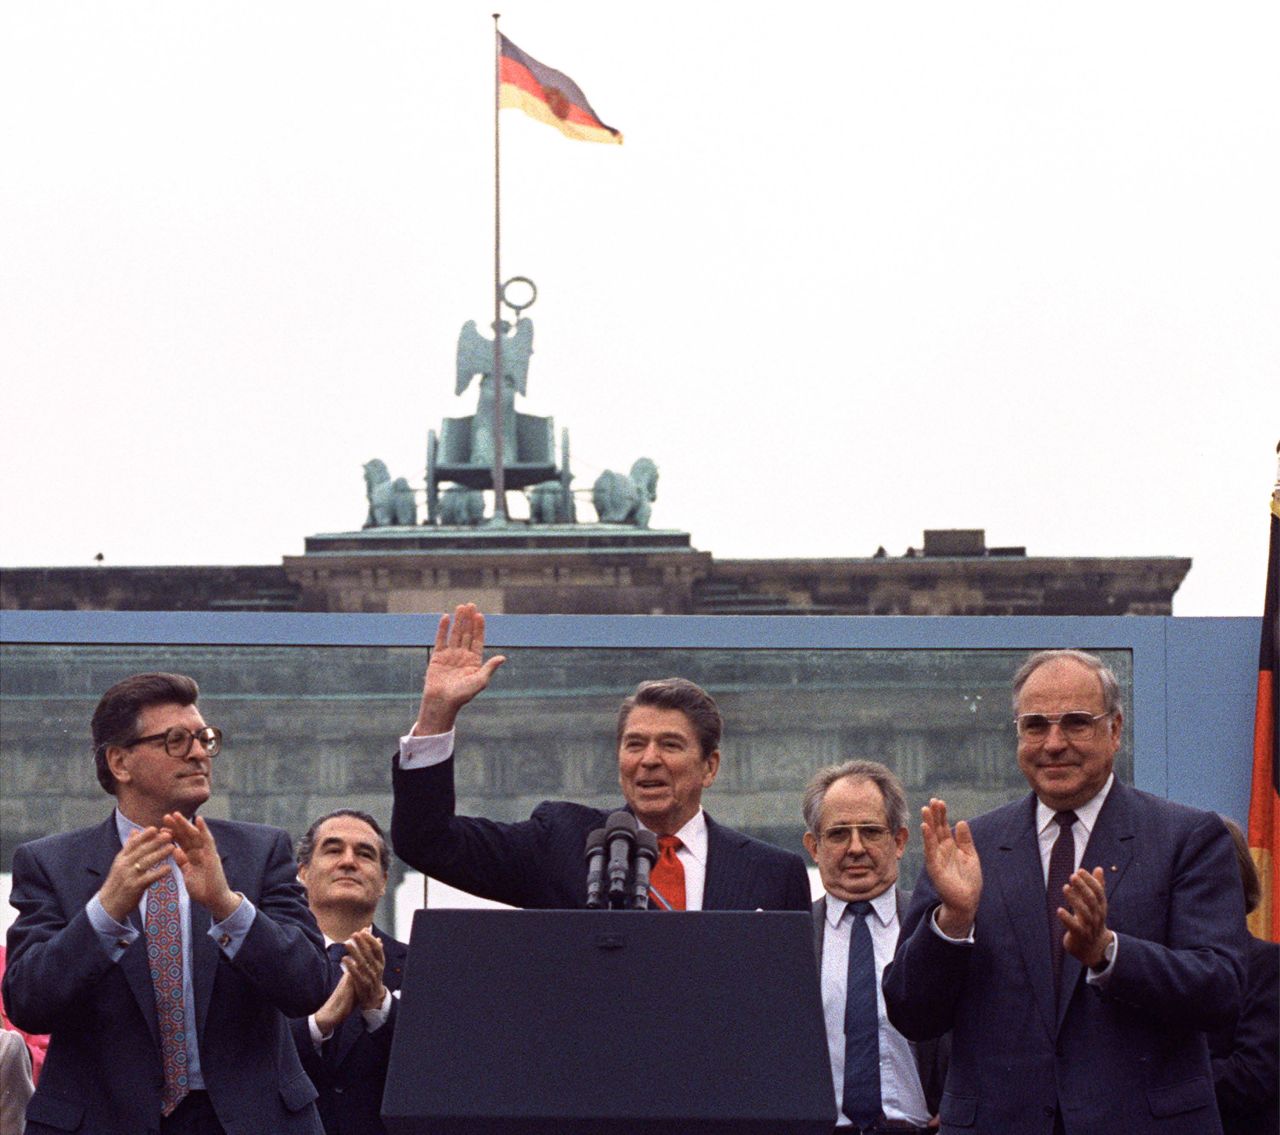 United States President Ronald Reagan delivers his famous speech in front of the Brandenburg Gate in 1987, urging his Soviet counterpart: "Mr. Gorbachev, tear down this wall!' 